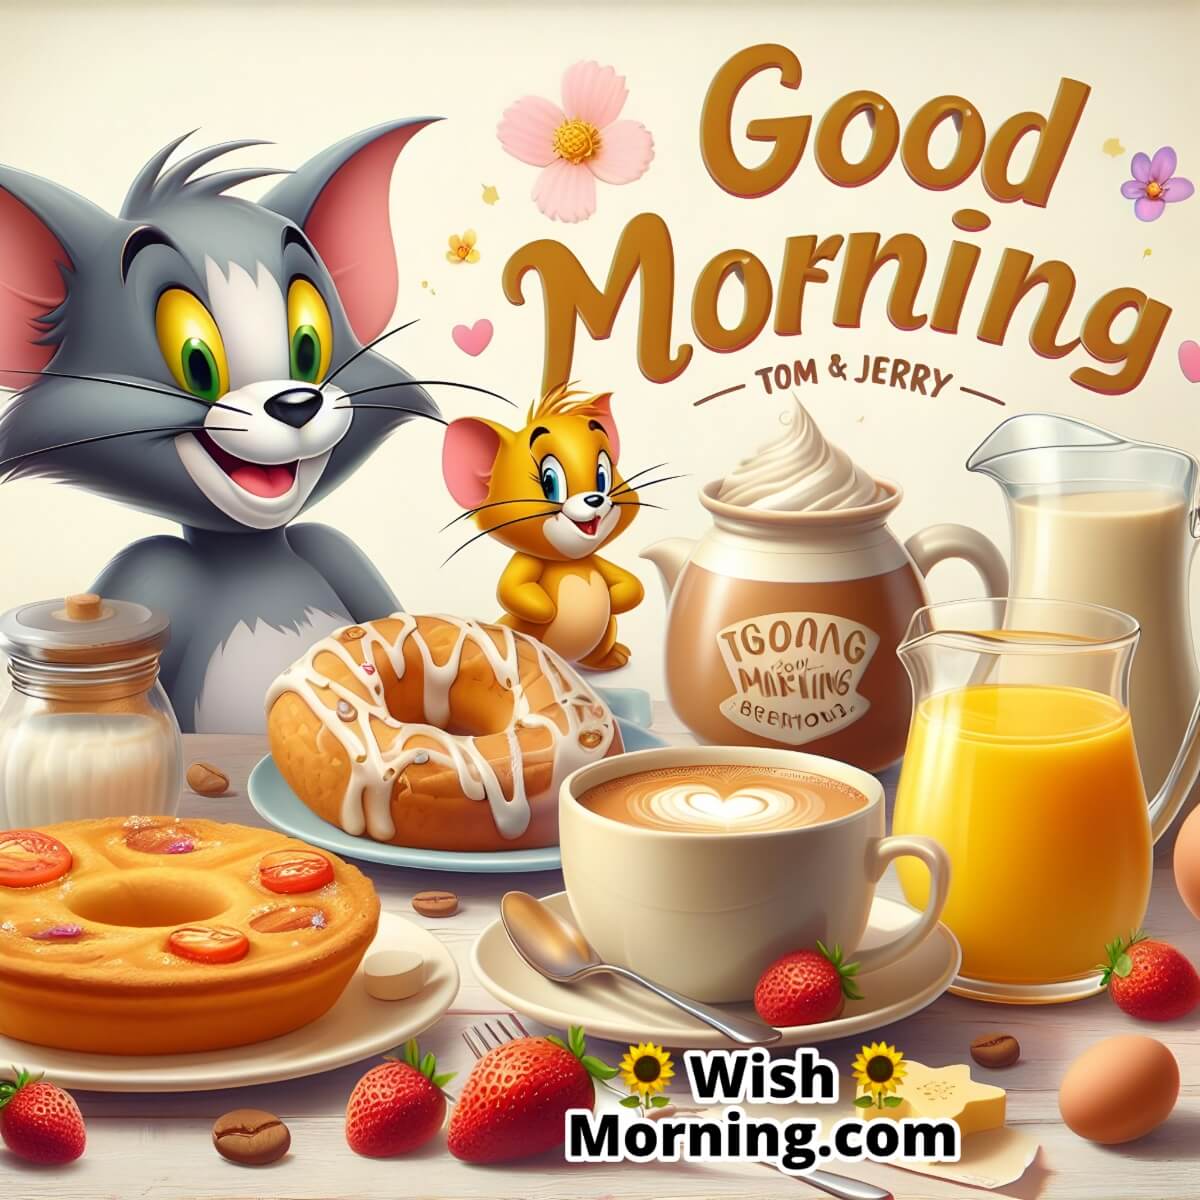 Good Morning Tom And Jerry Breakfast Pic